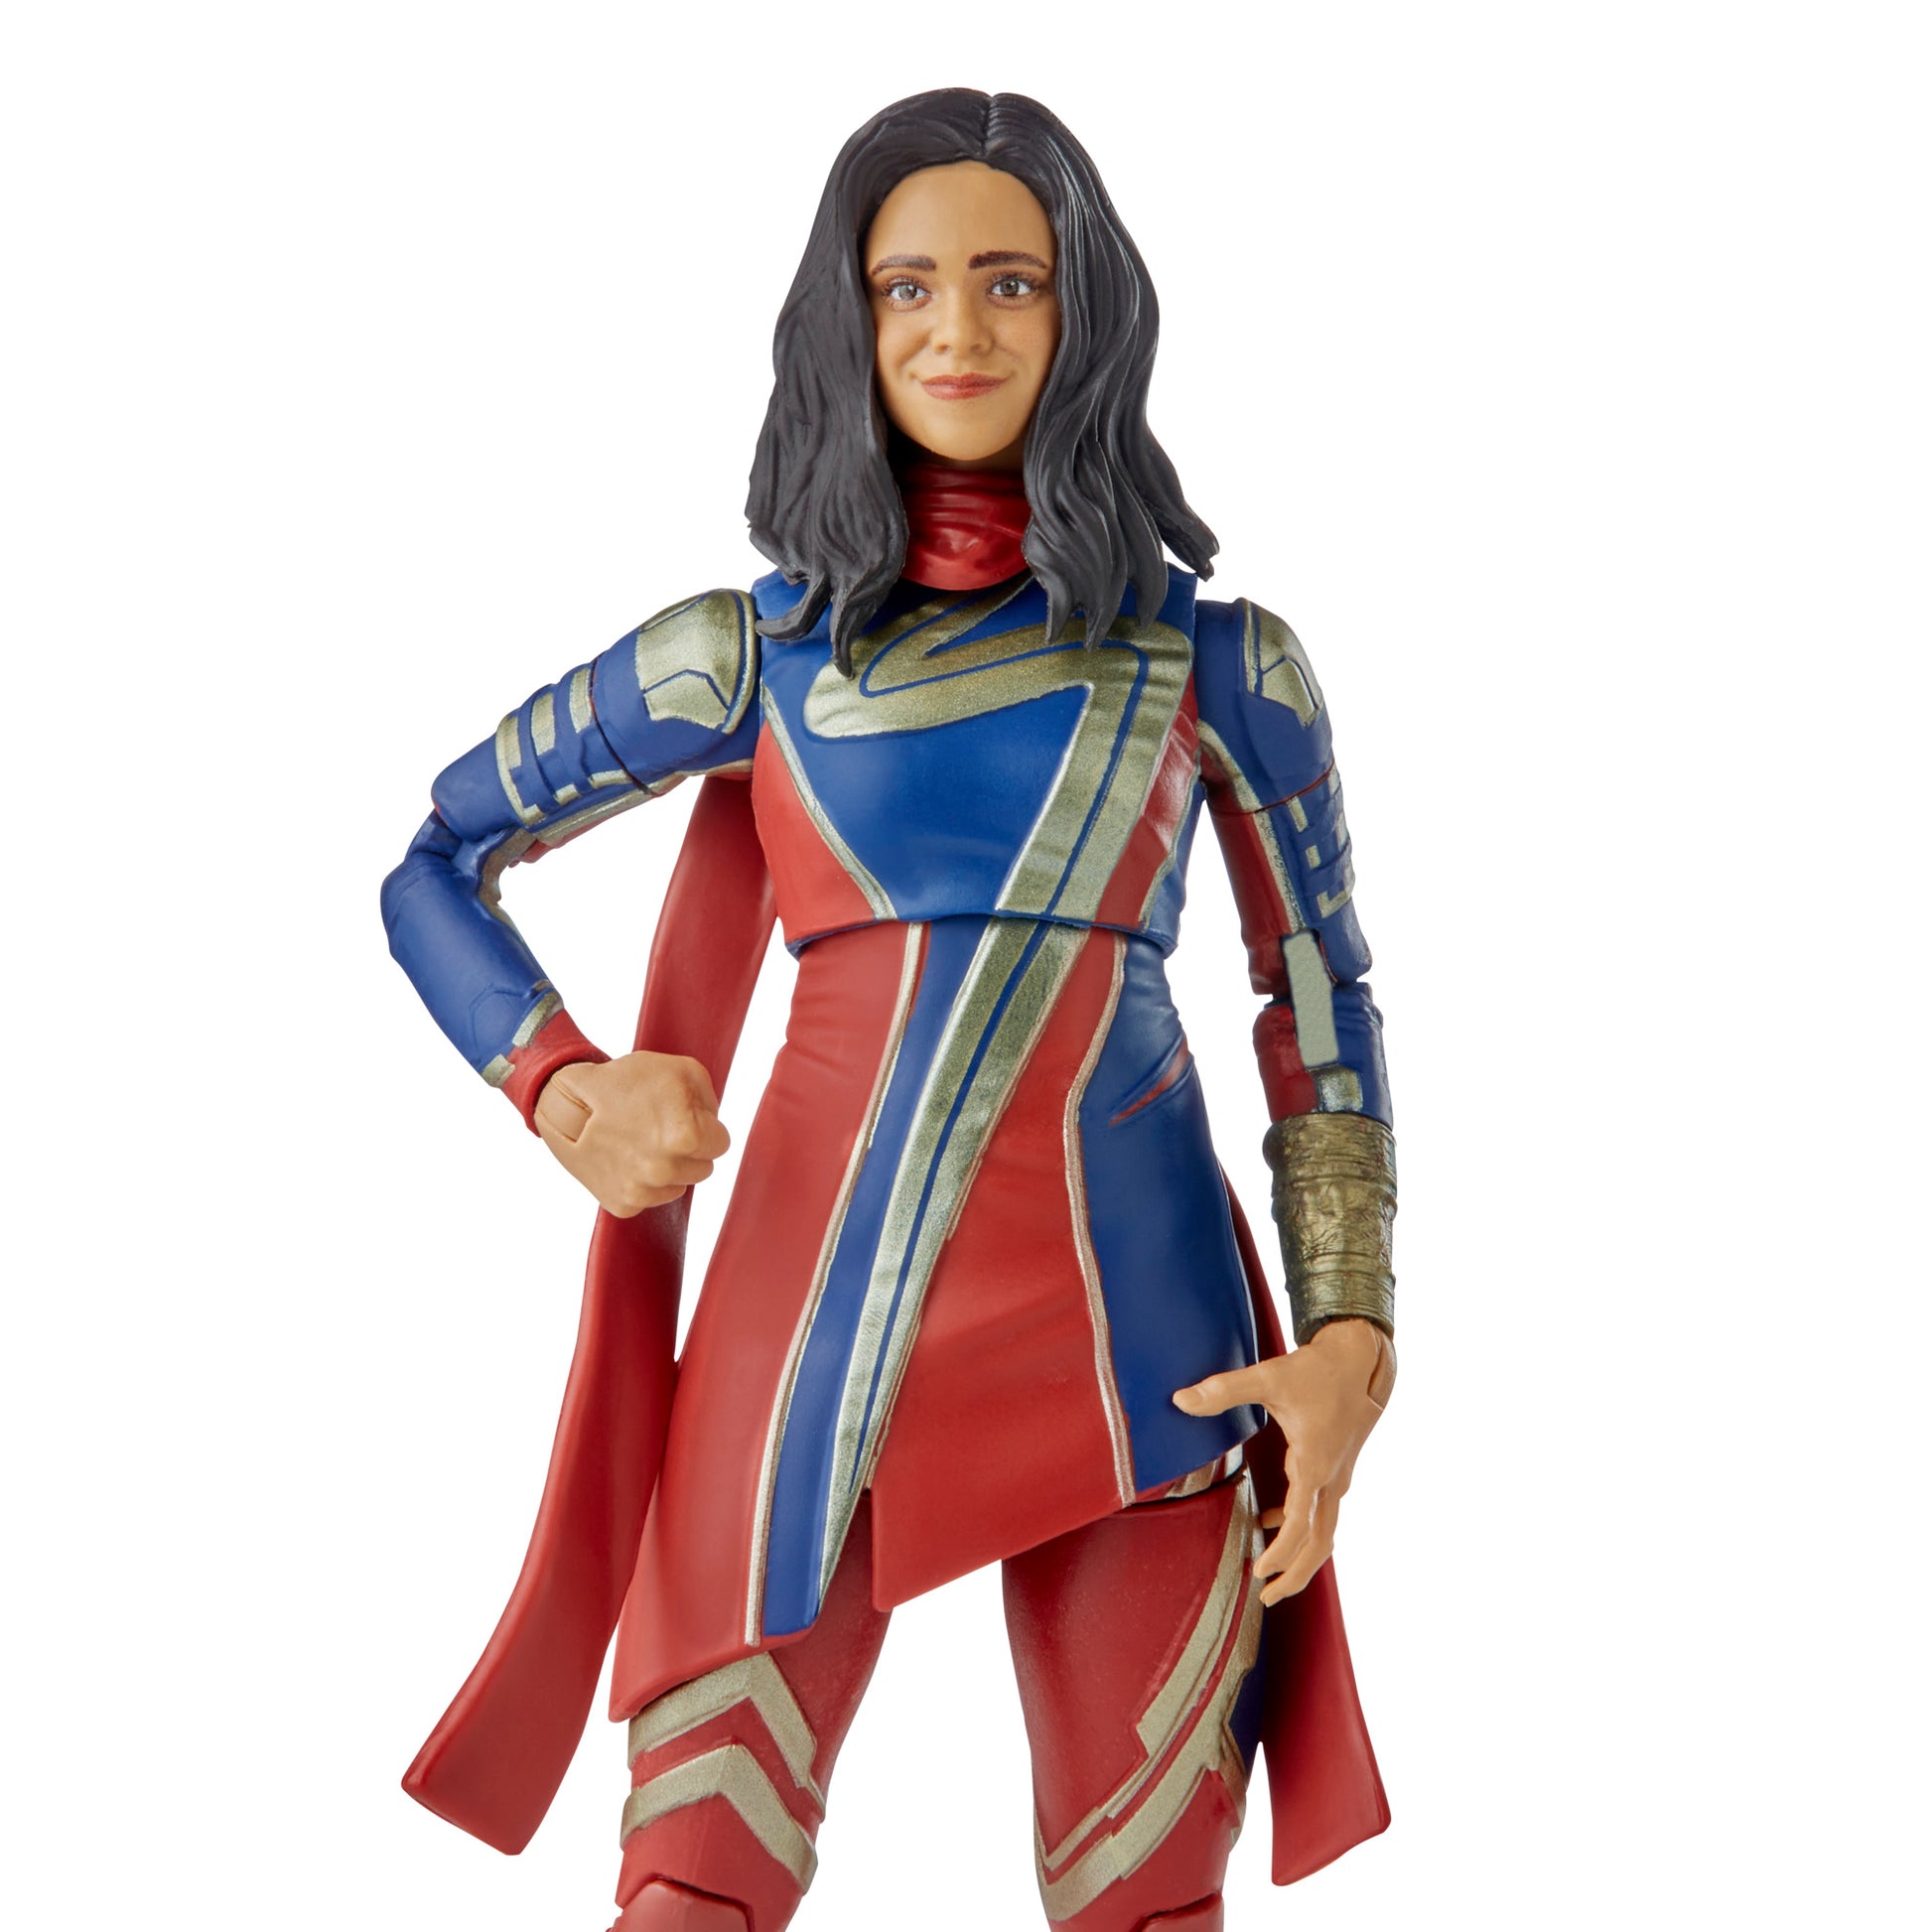 Marvel Legends Series Ms. Marvel Action Figure Toy close up look - Heretoserveyou